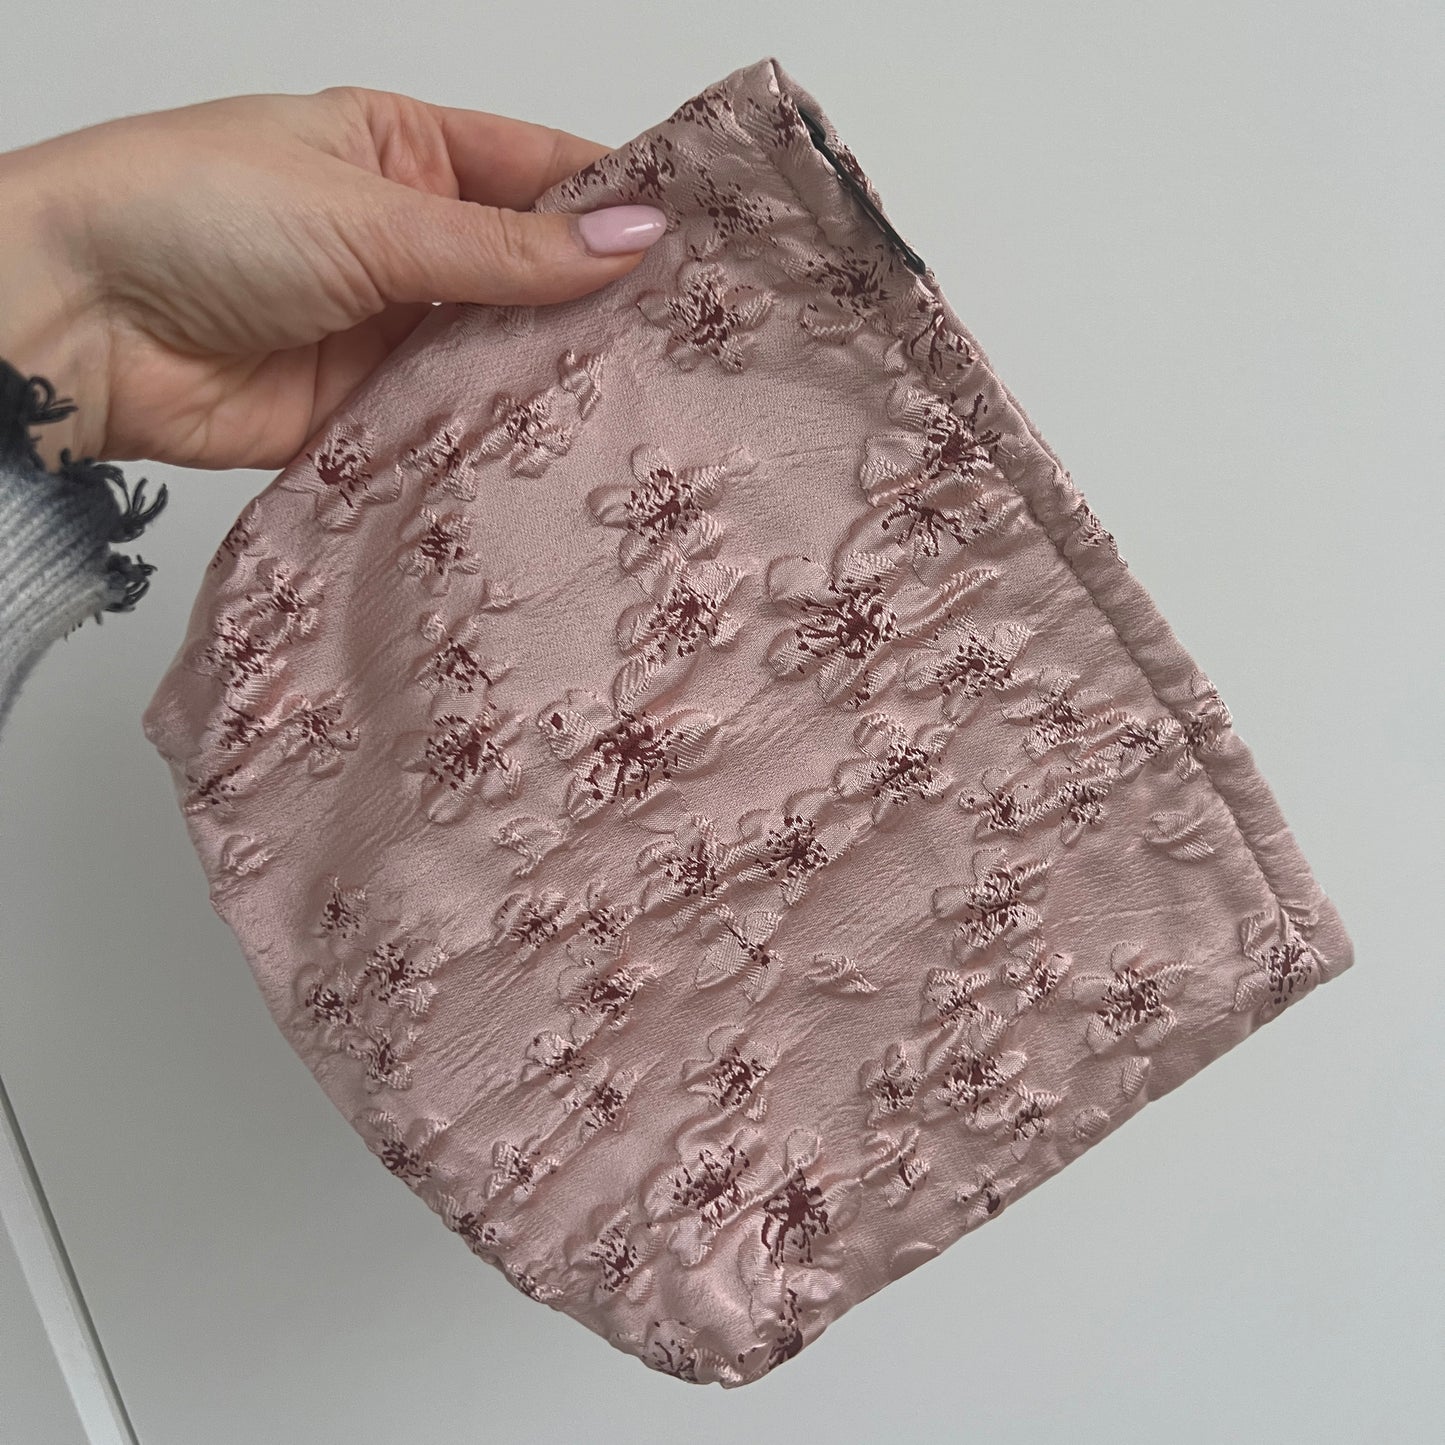 SAMPLE METALLIC FLORAL POUCH : NO EMBROIDERY /  CUSTOMIZATION